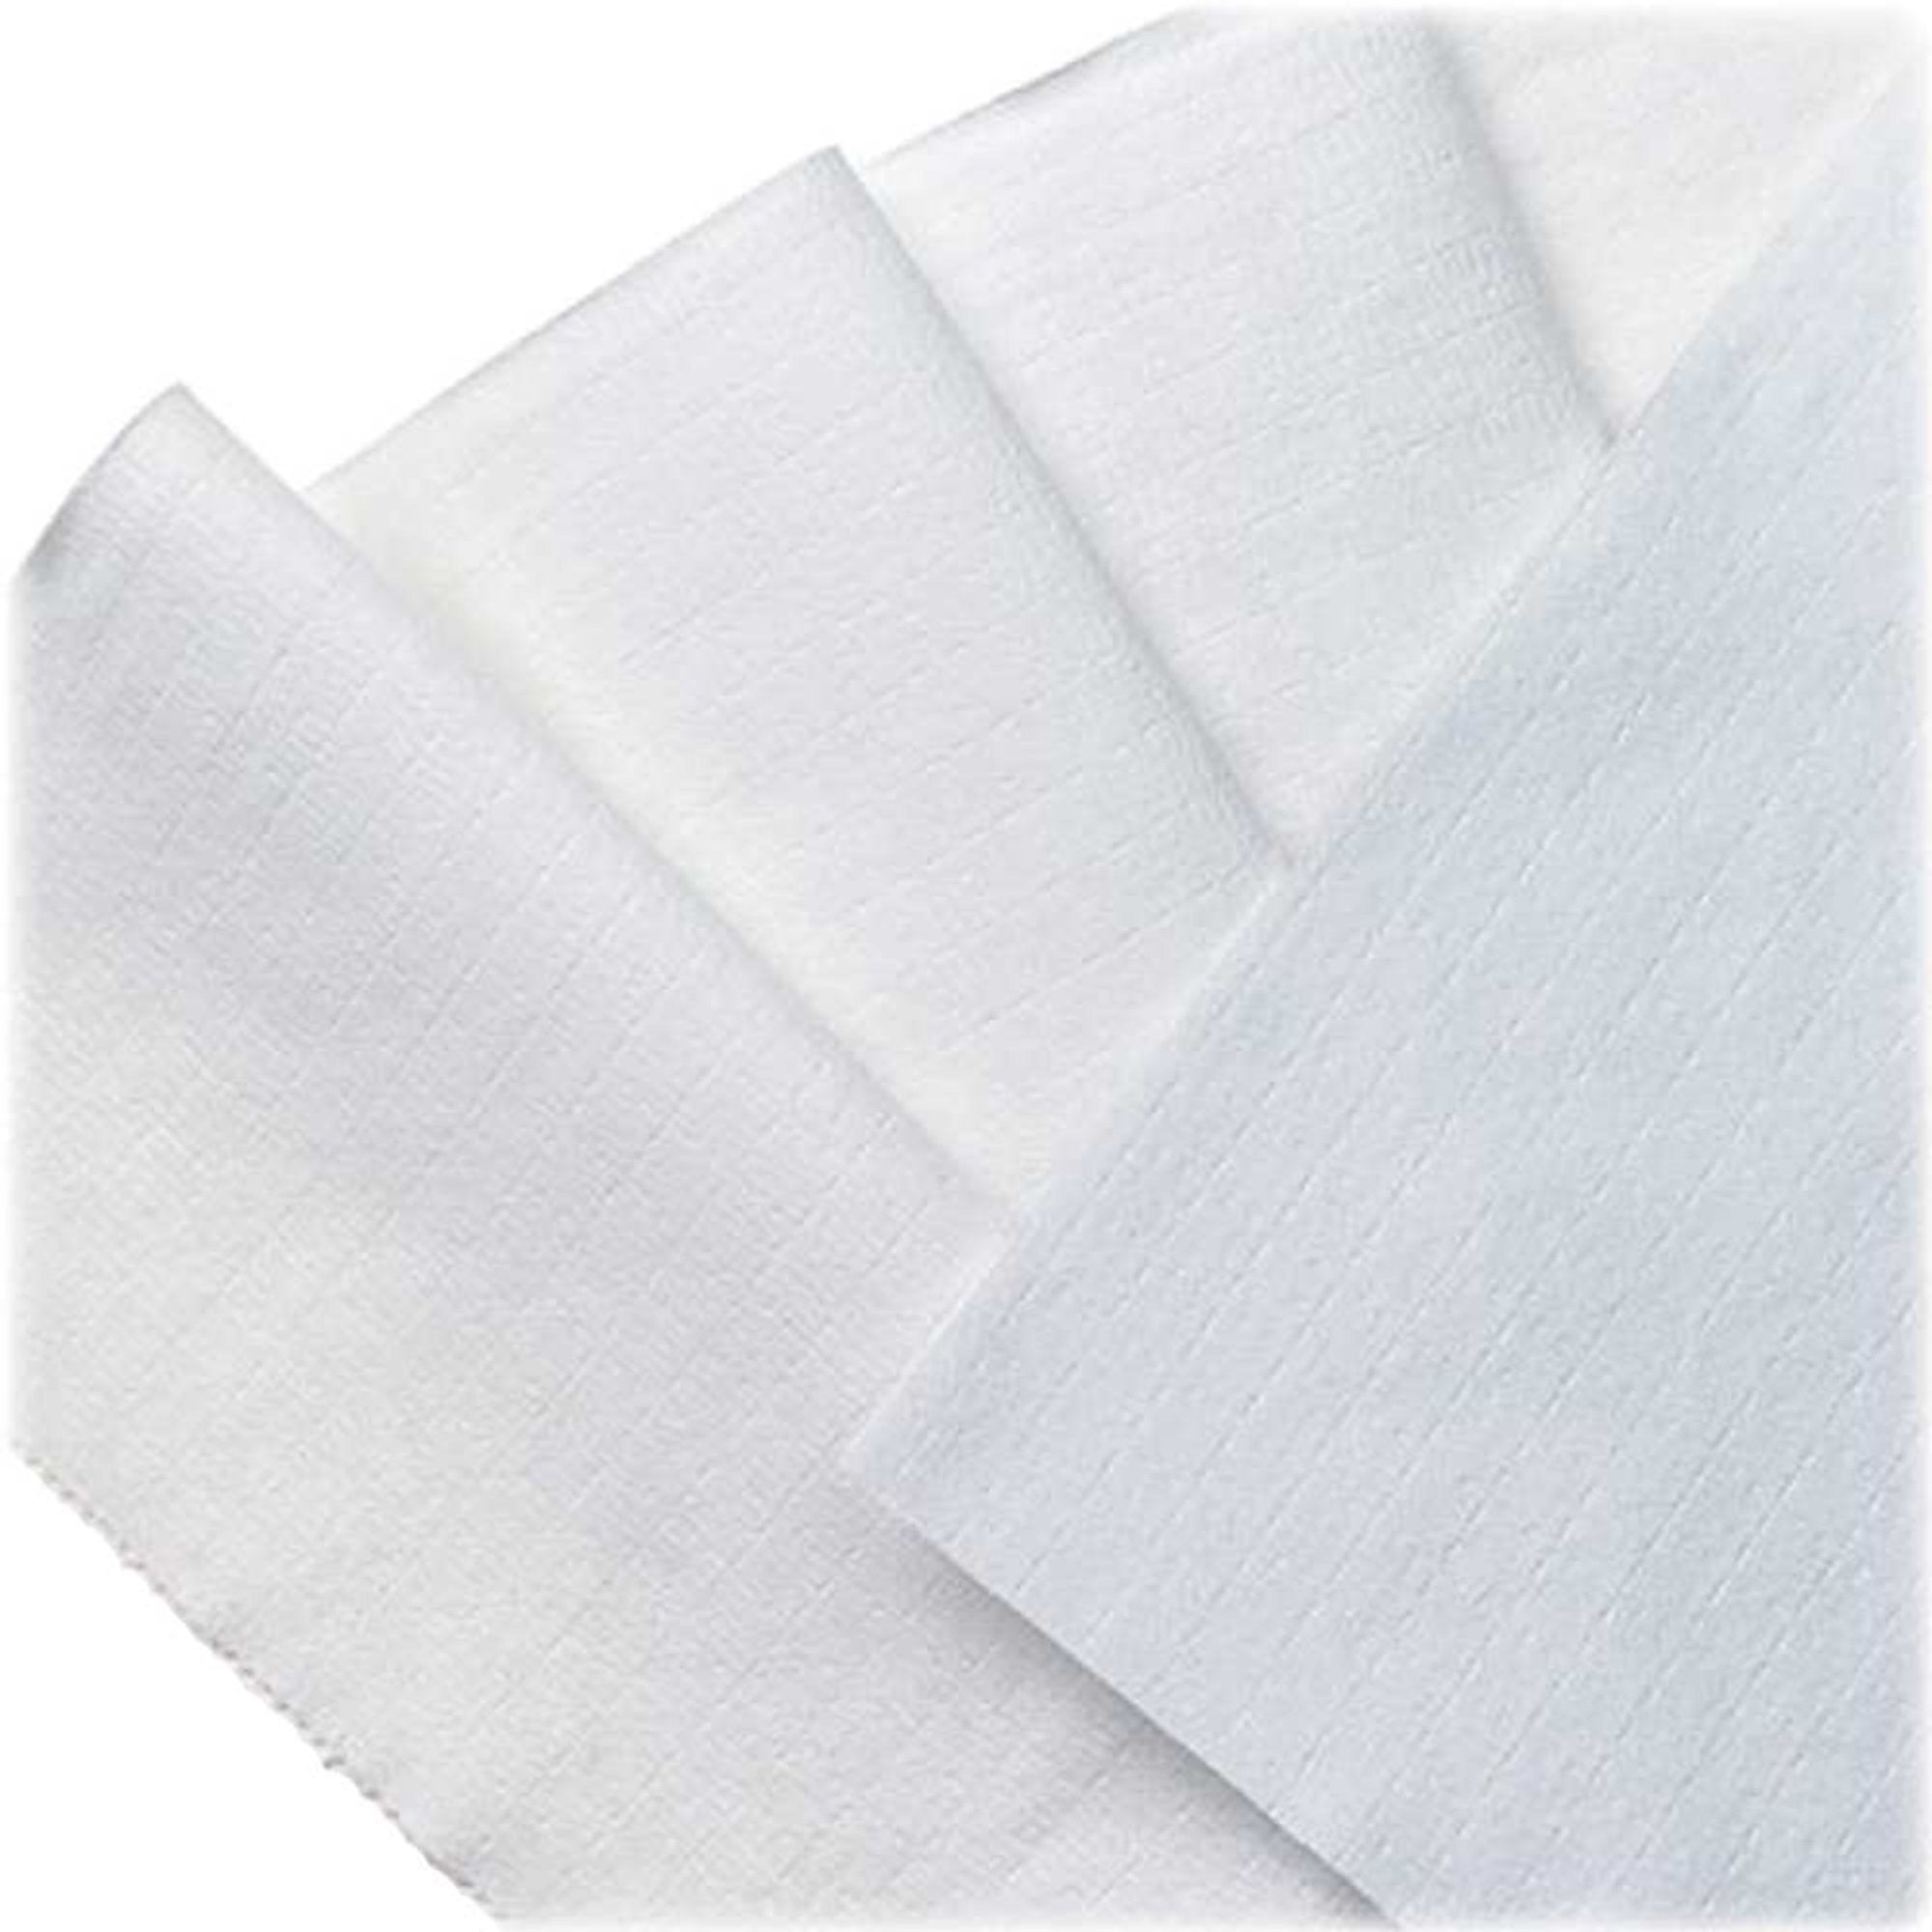 Task Wipe WypAll® X60 White NonSterile Hydroknit Fabric 12-1/2 X 16-4/5 Inch Disposable